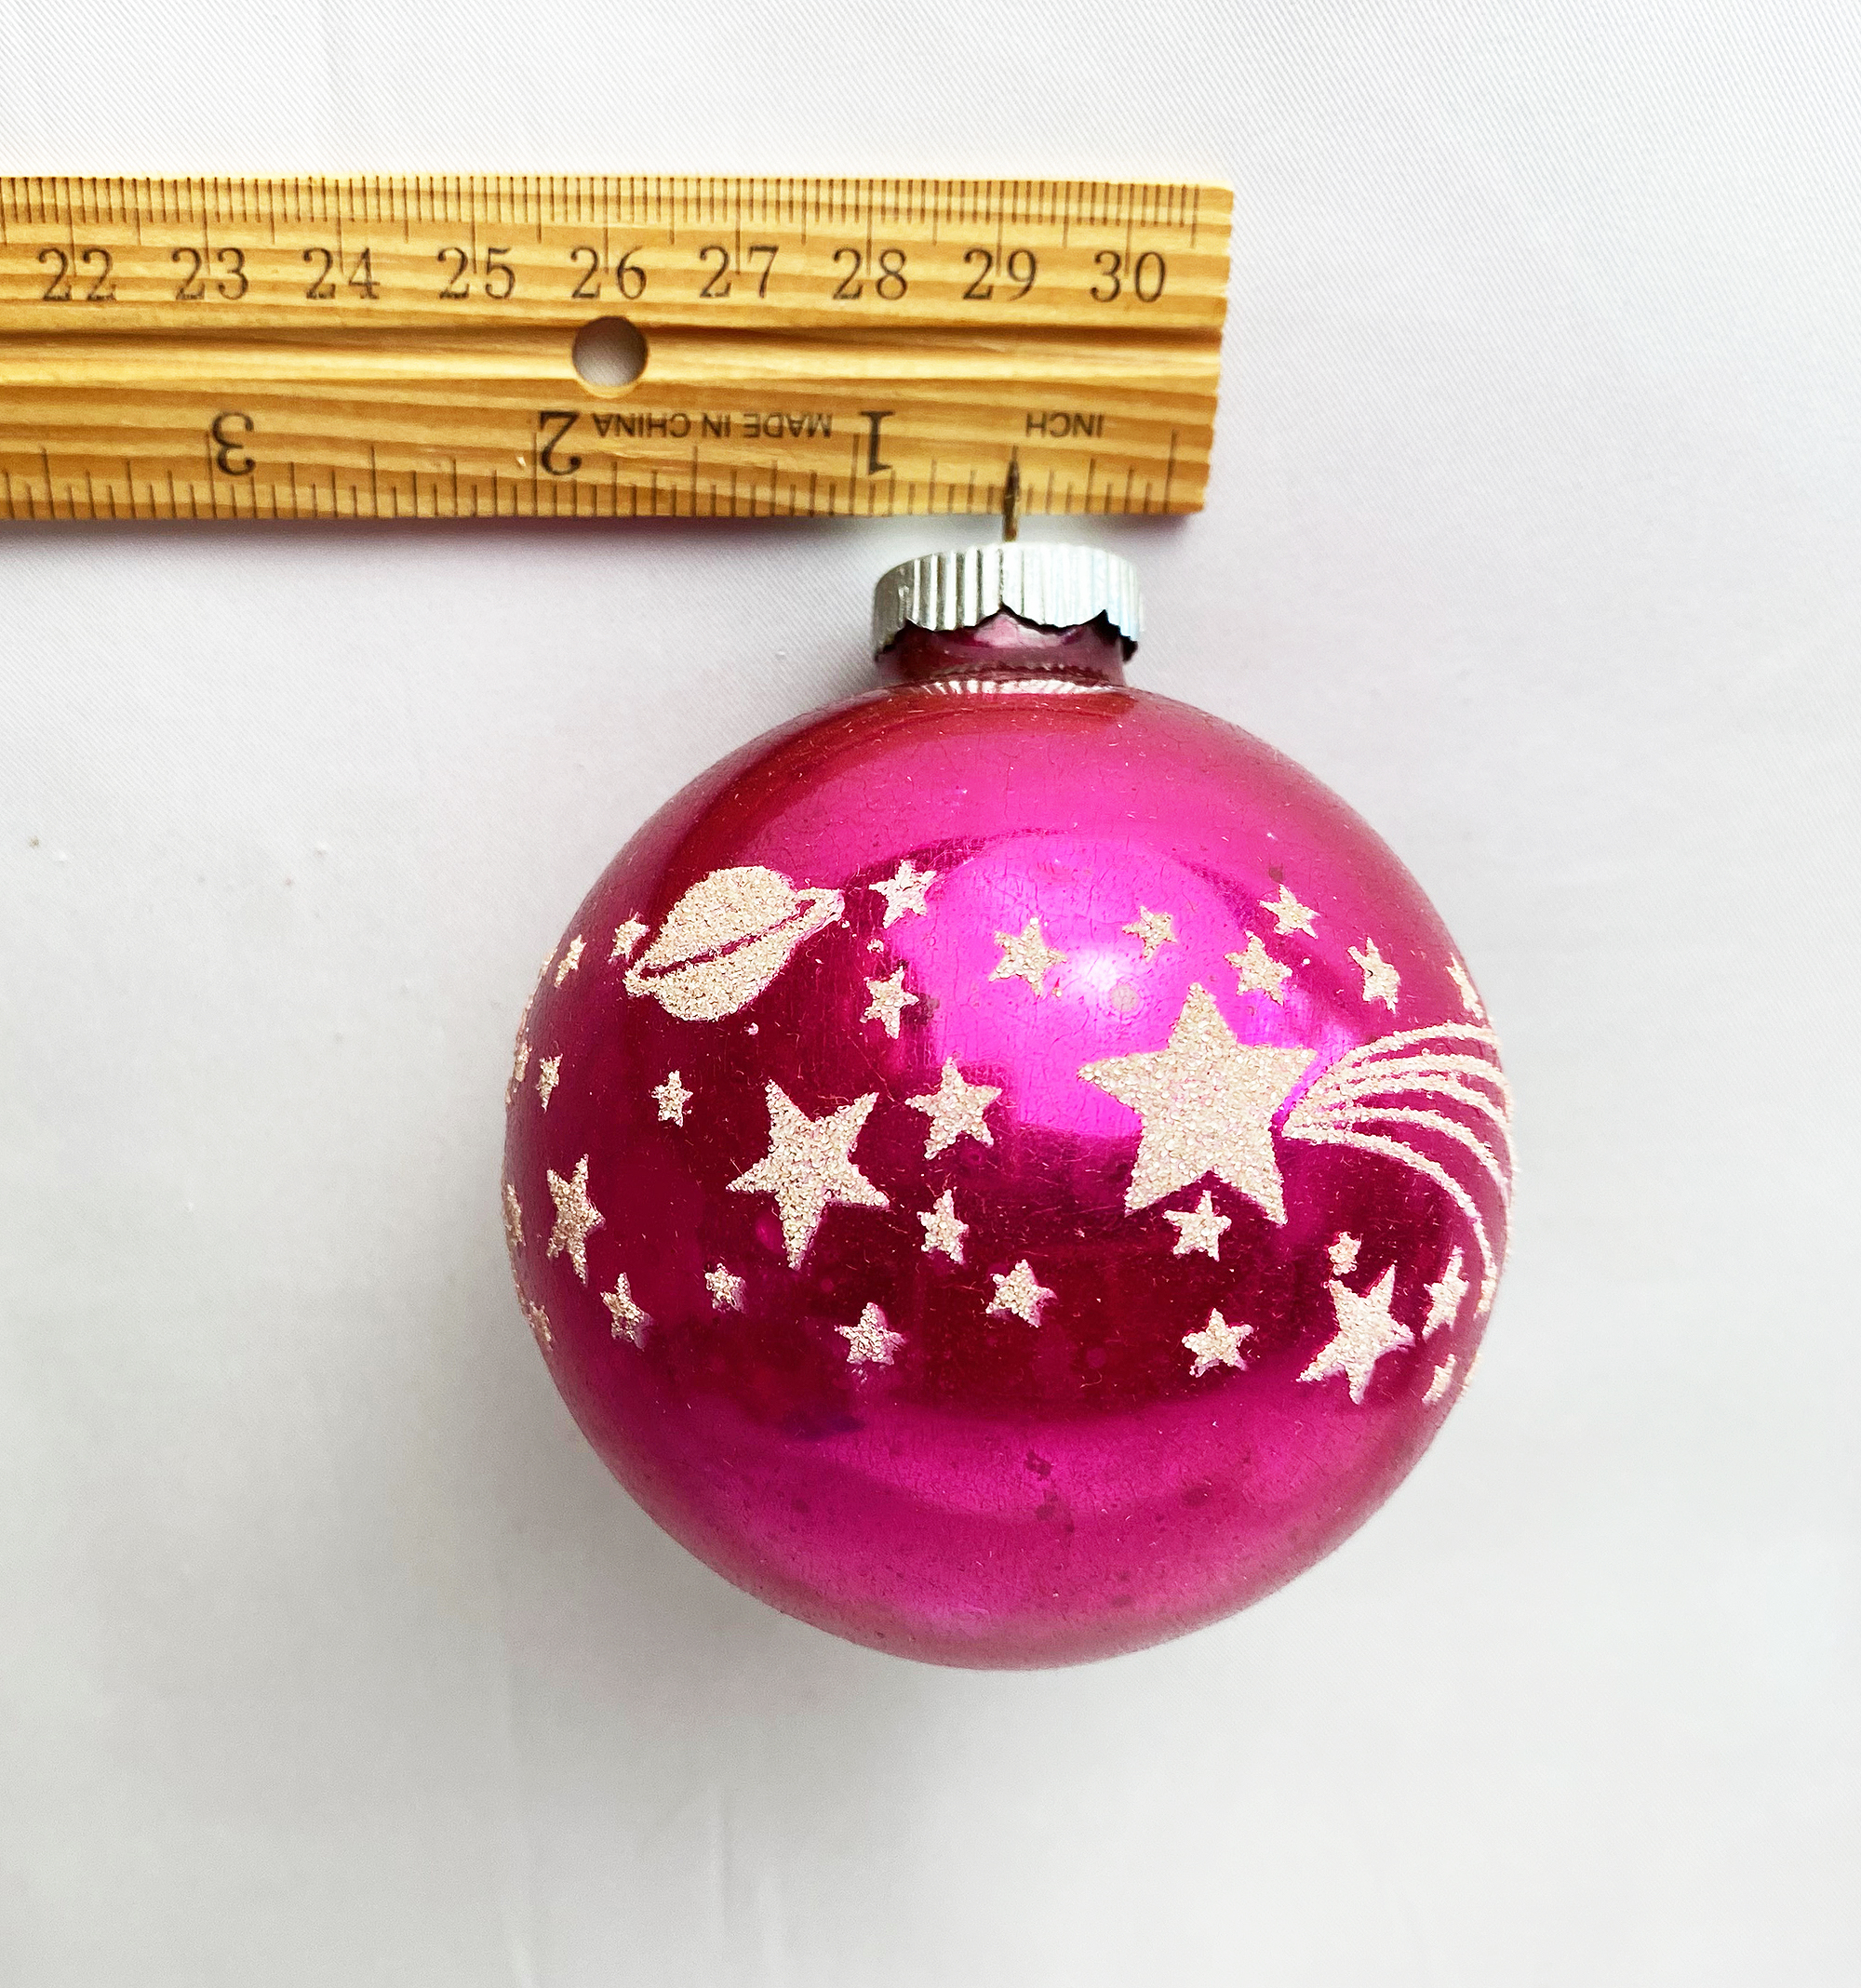 Pink Christmas Tree Decorated with Vintage Shiny Brite Ornaments